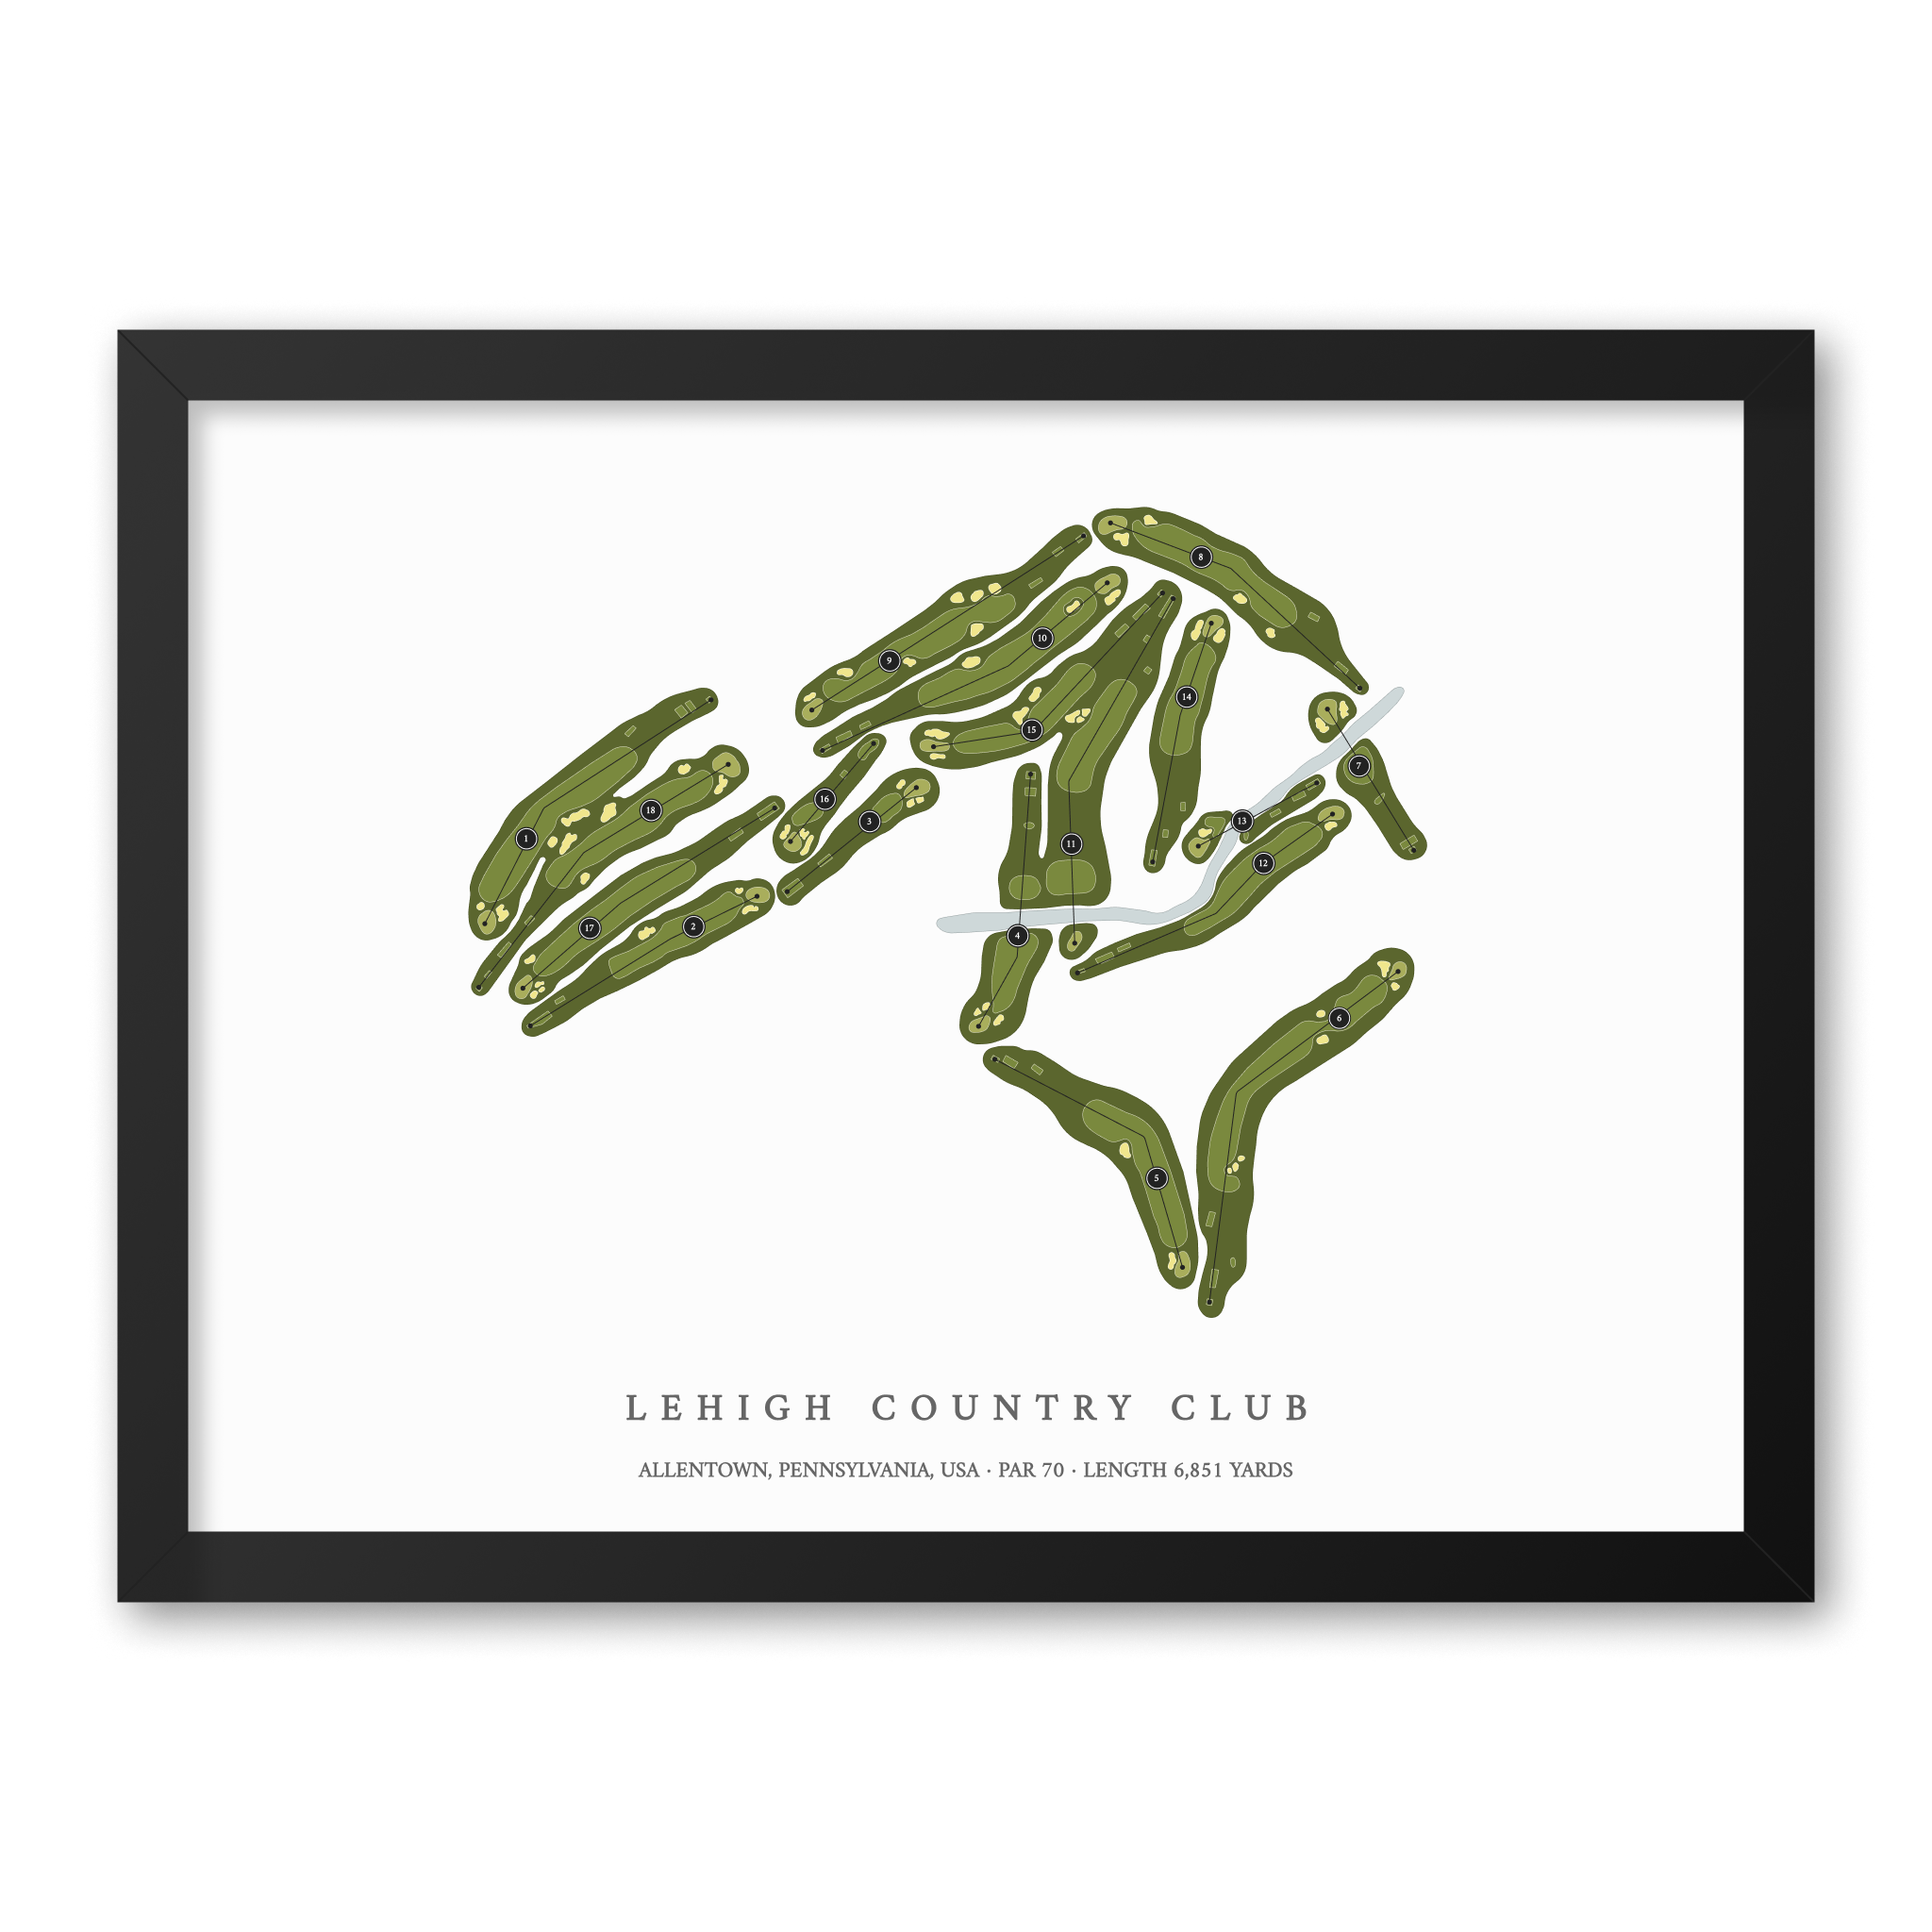 Lehigh Country Club | Heritage Style Golf Course Print | Black Frame